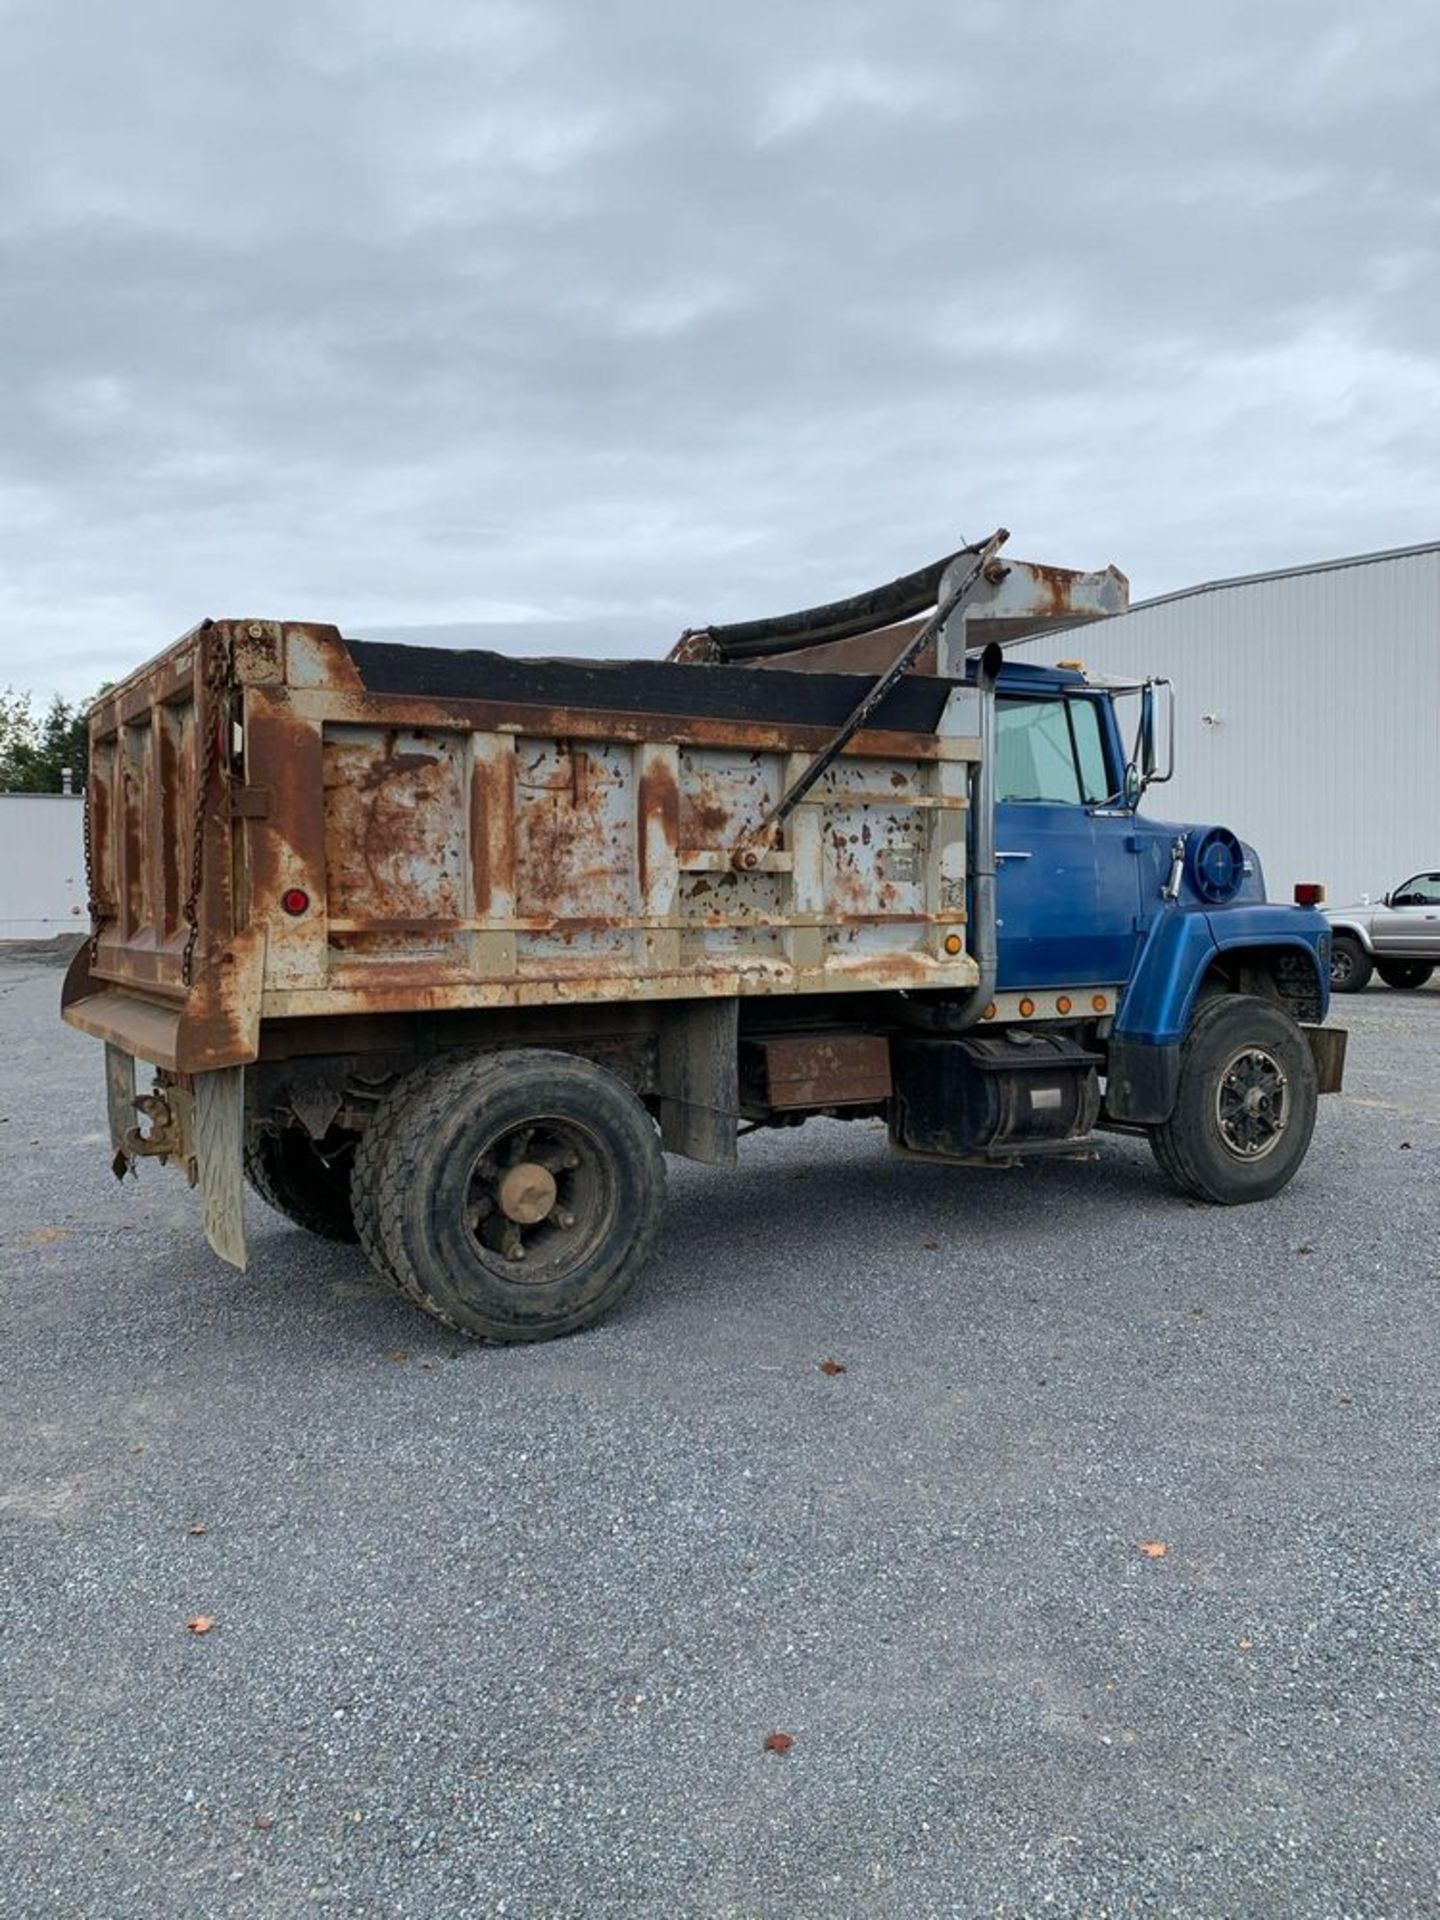 1990 FORD L9000 S/A DUMP TRUCK - Image 11 of 72